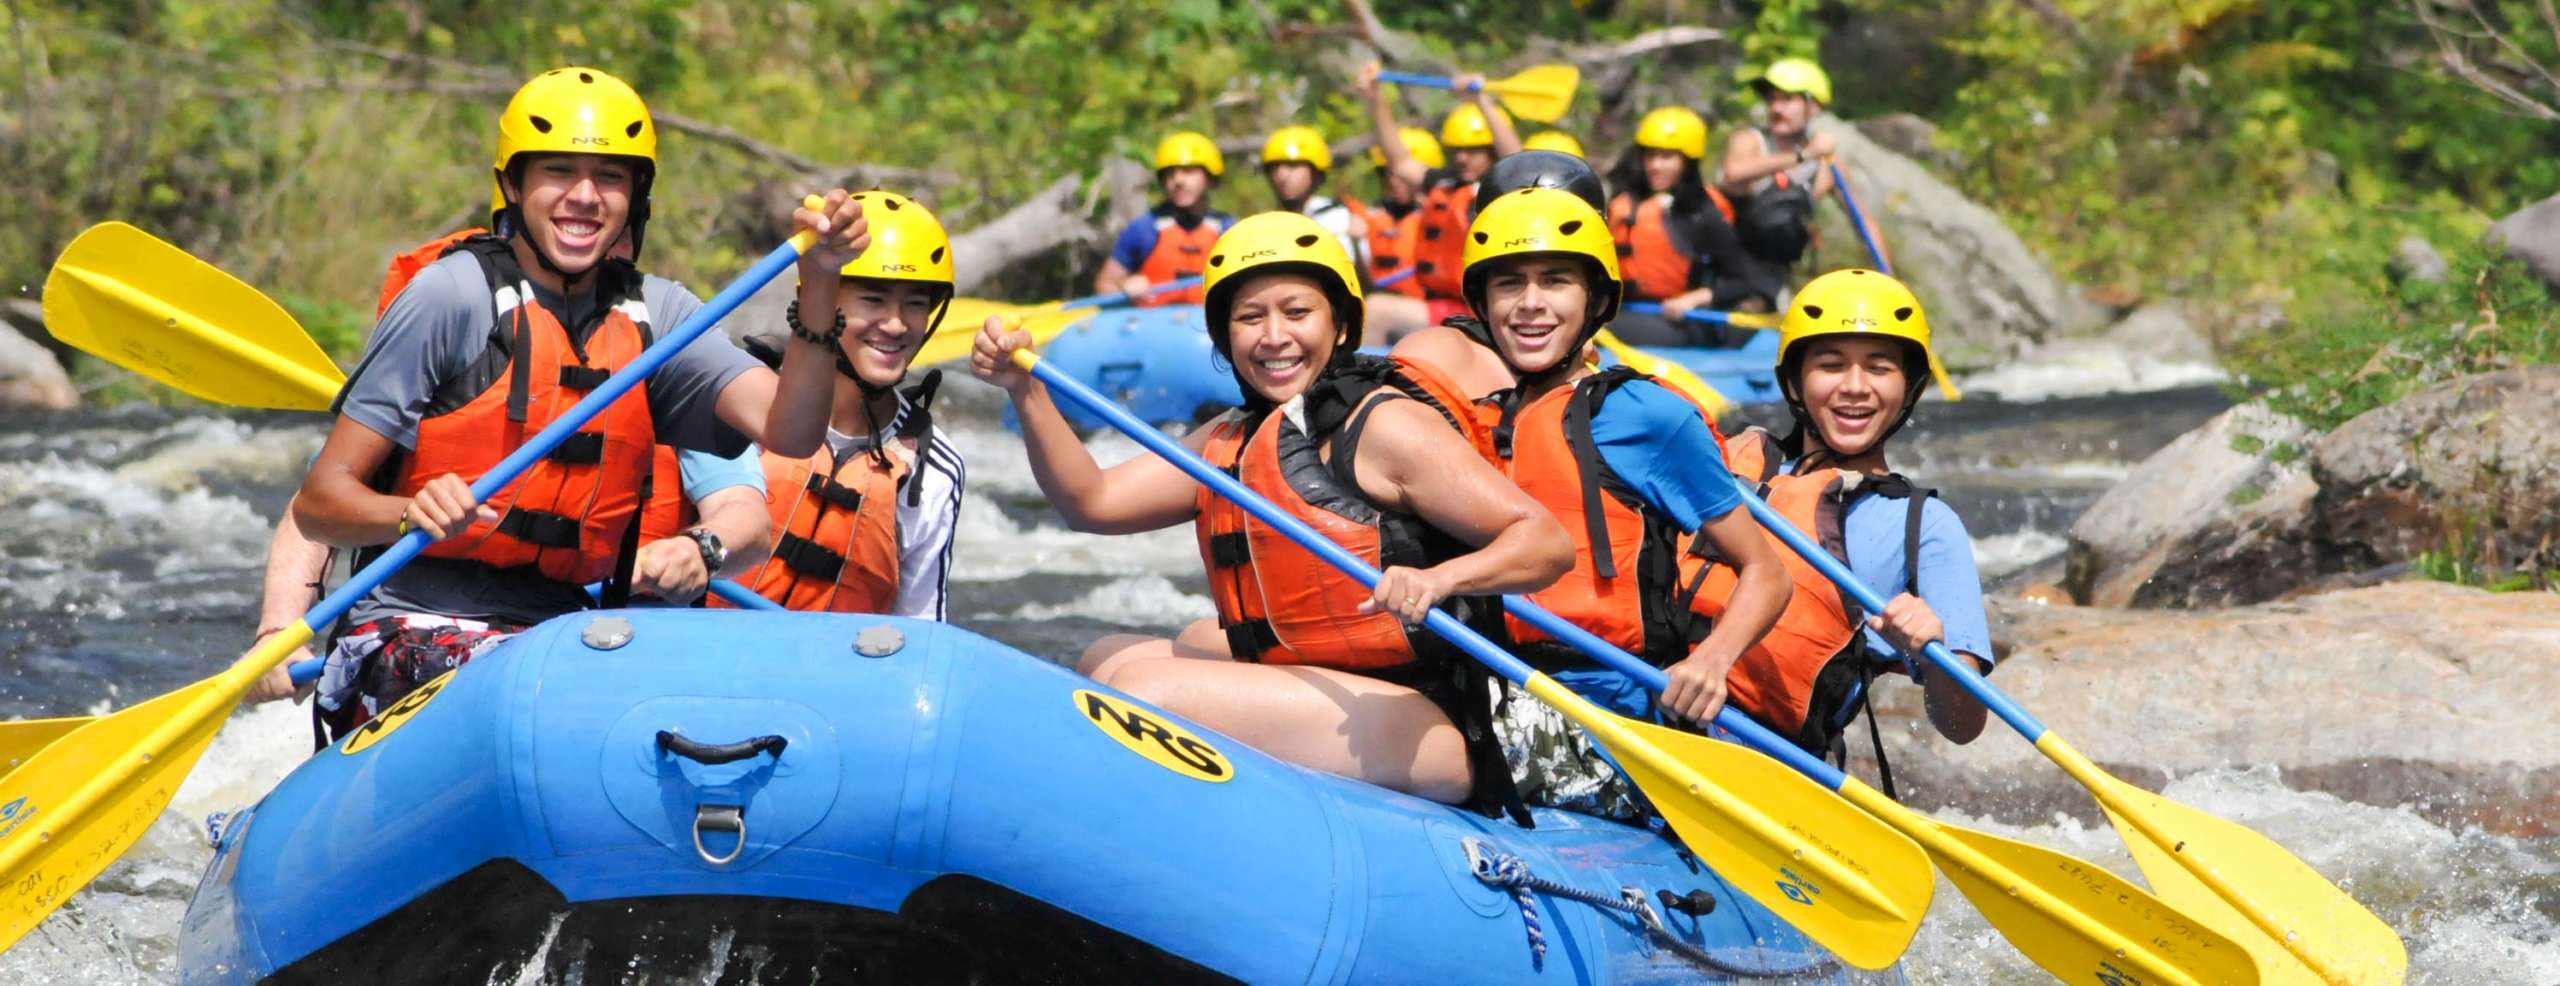 Group of adults rafting down rapids